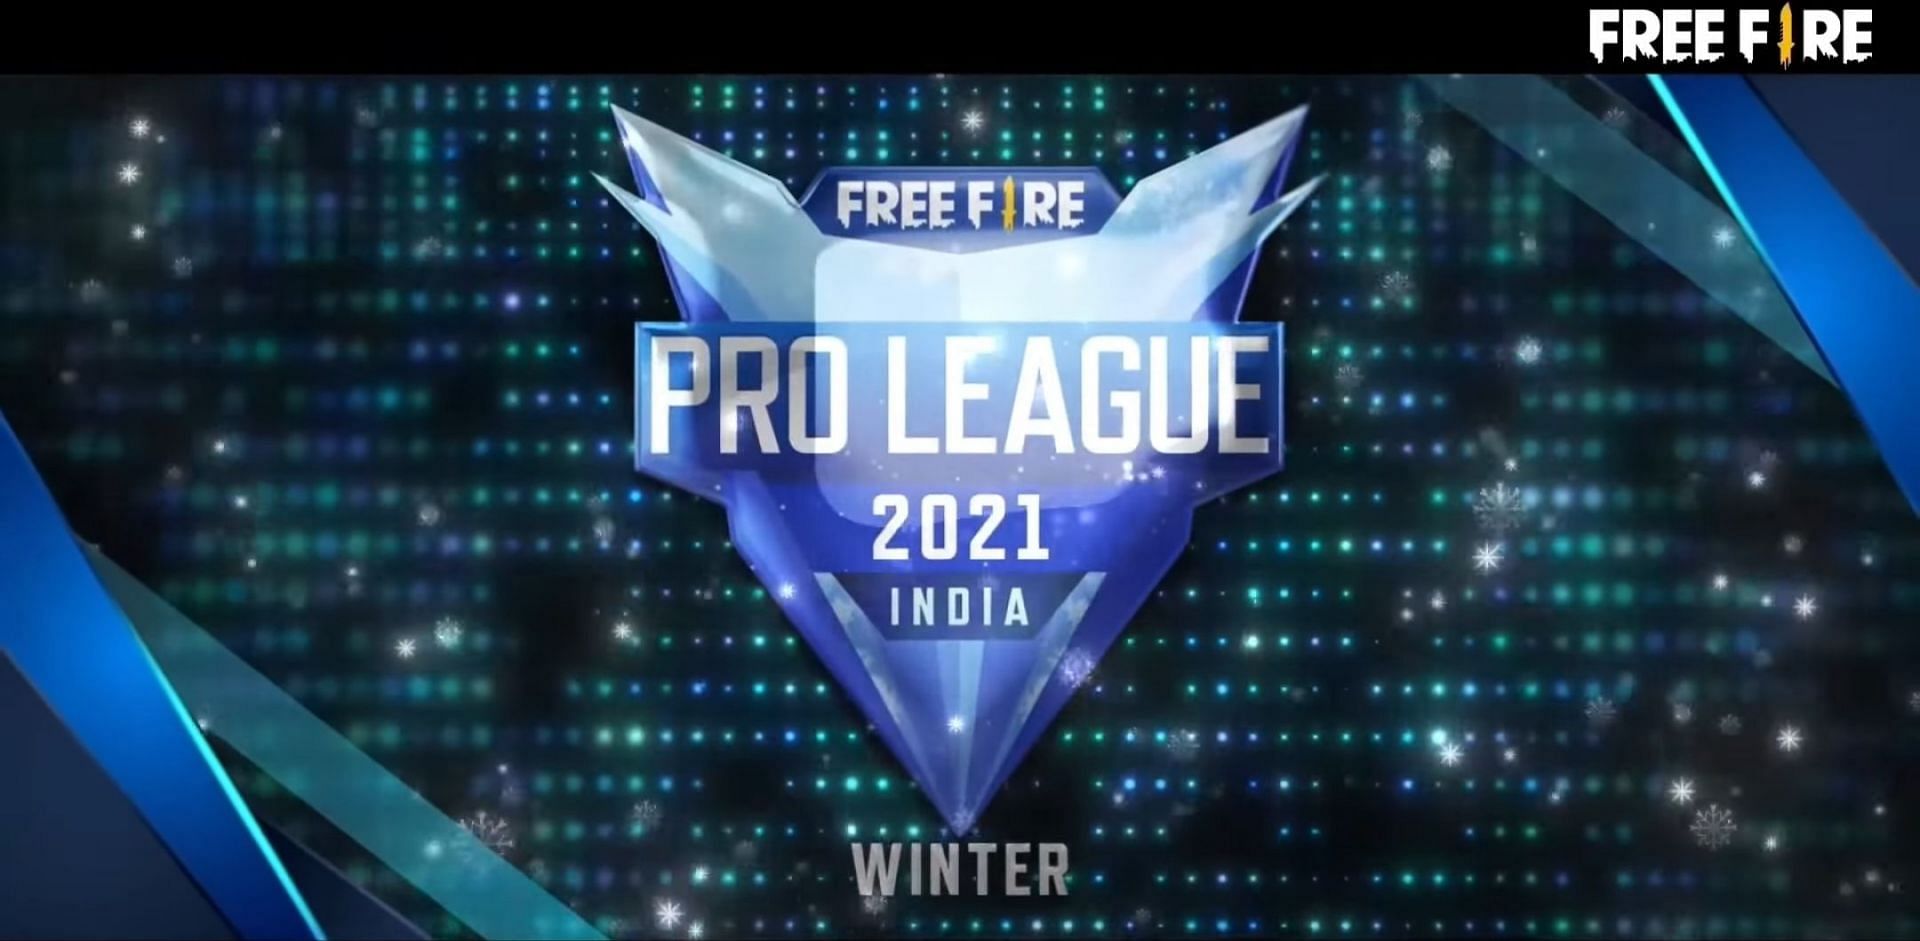 The Registrations Free Fire Pro League 2021 winter will begin on December 21 (Image via Garena)